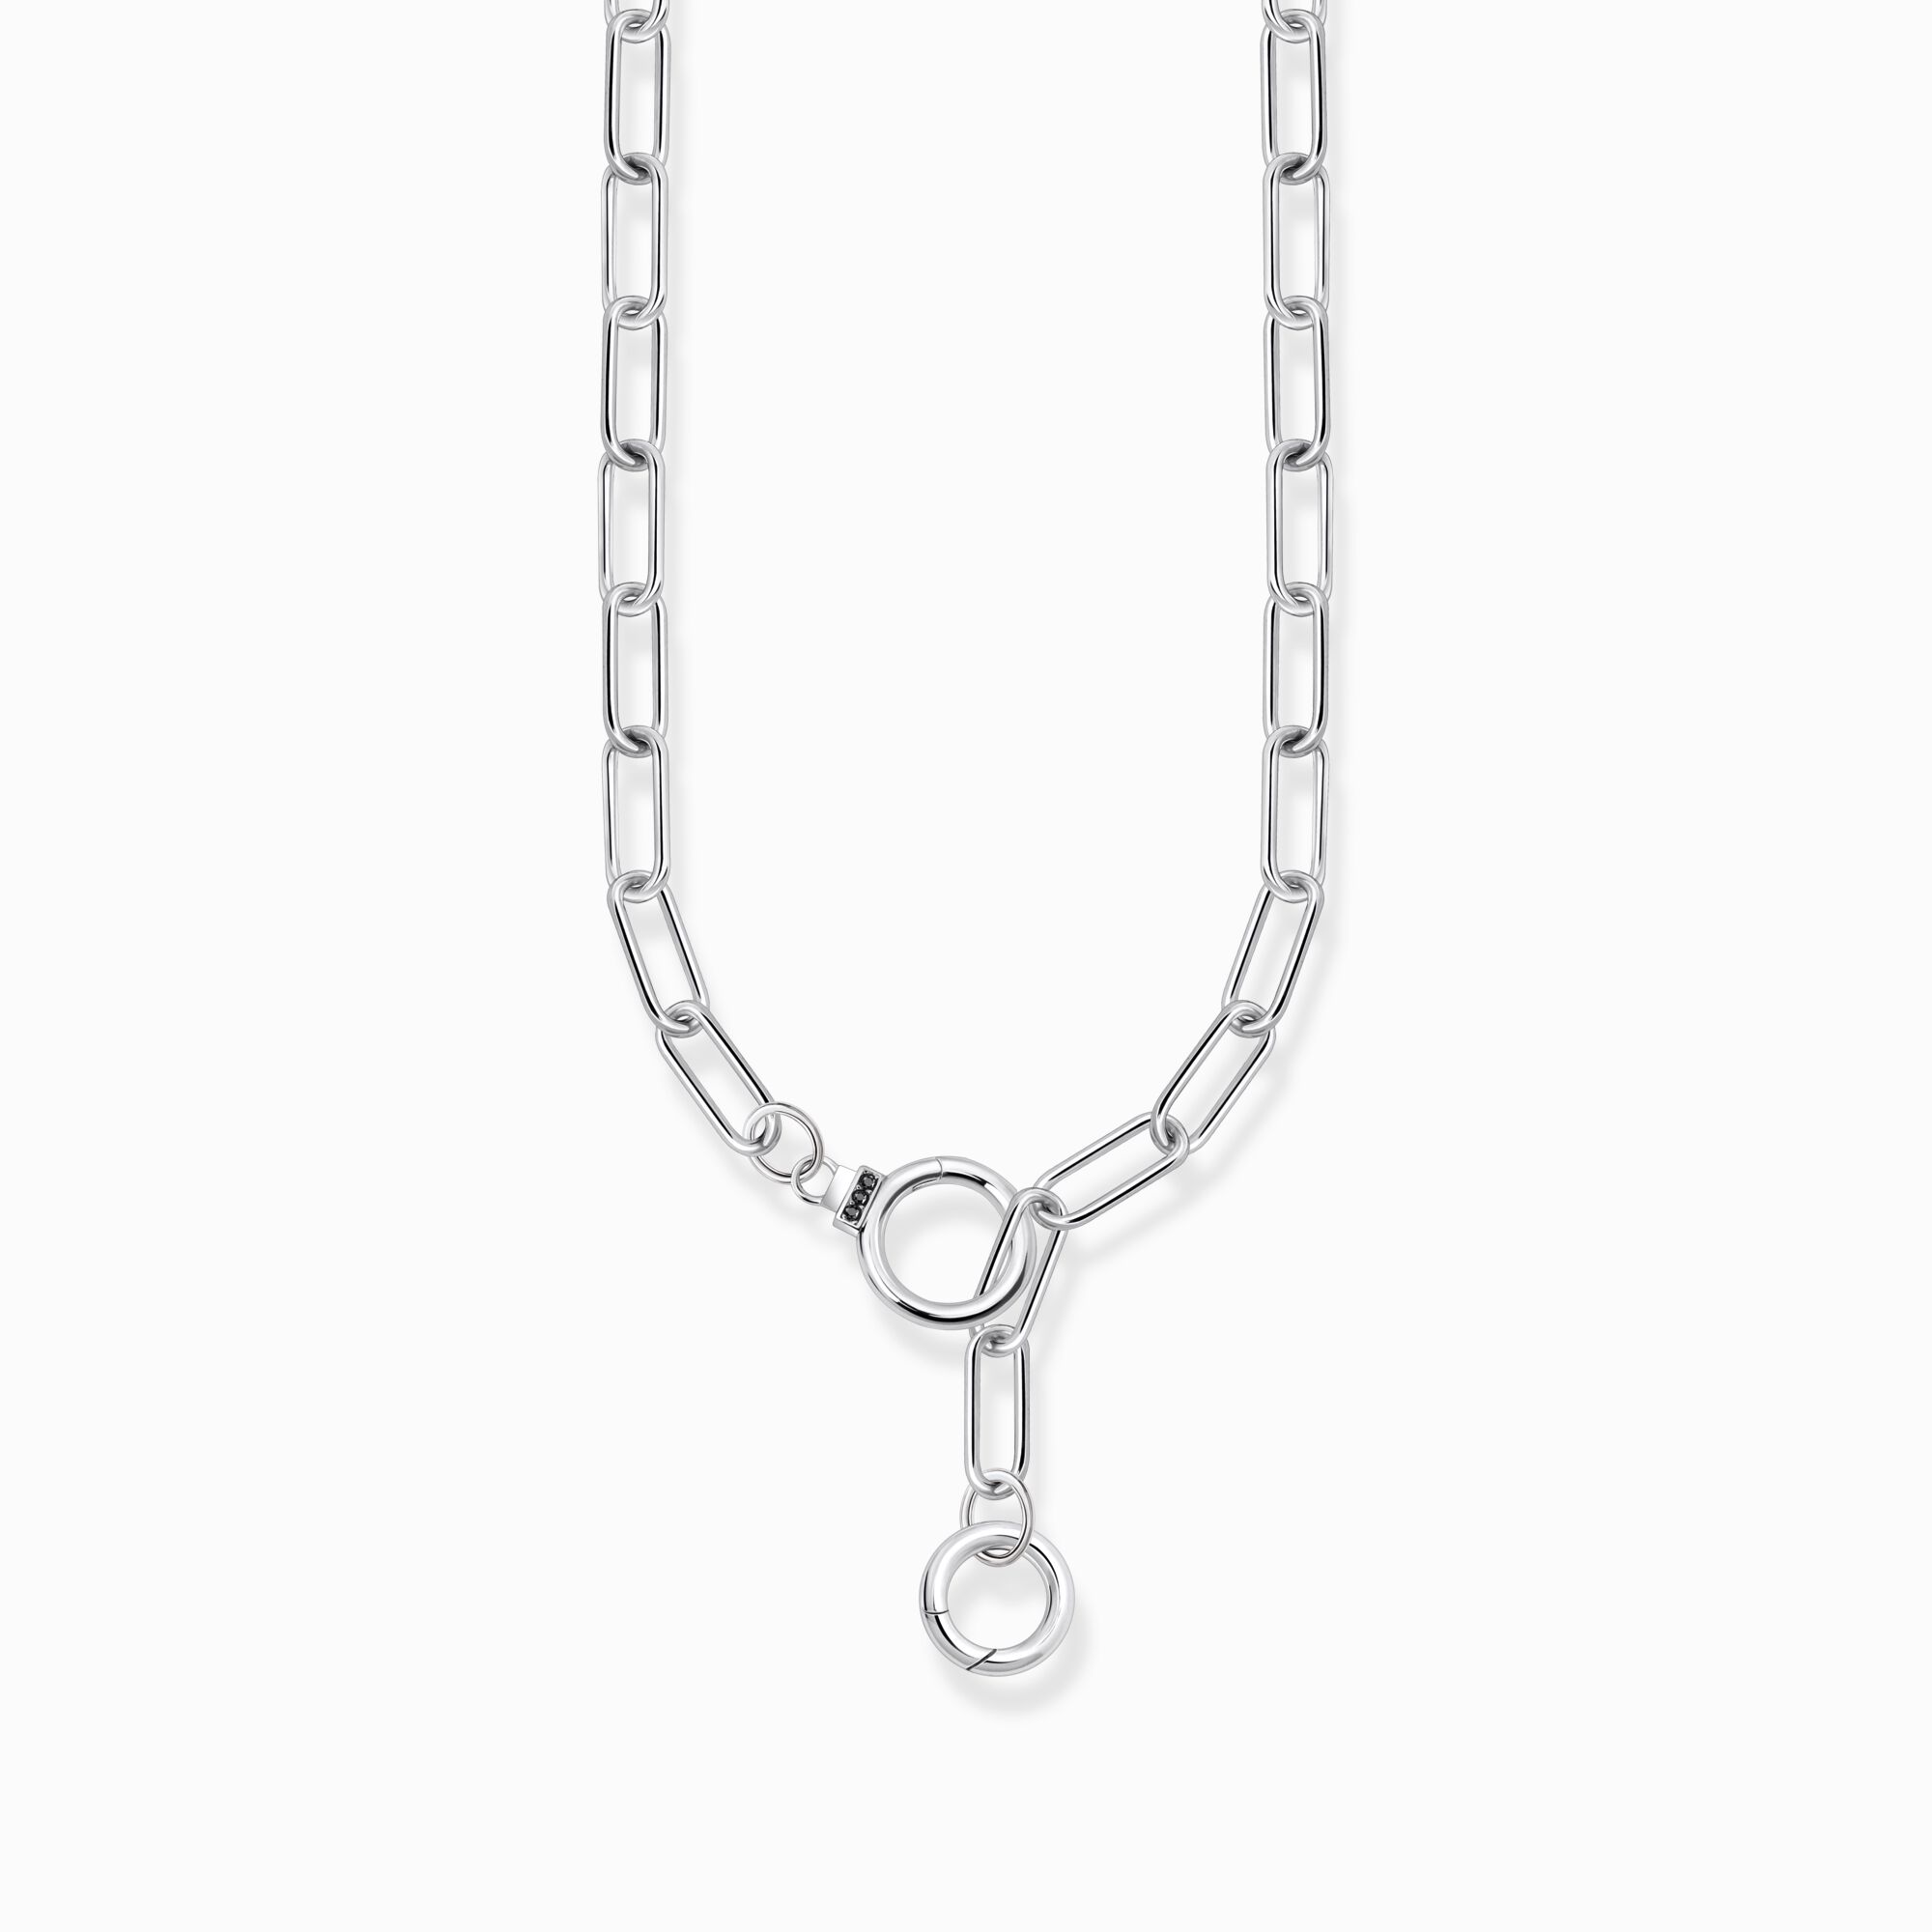 Silver blackened necklace with stone-studded ring clasp from the  collection in the THOMAS SABO online store